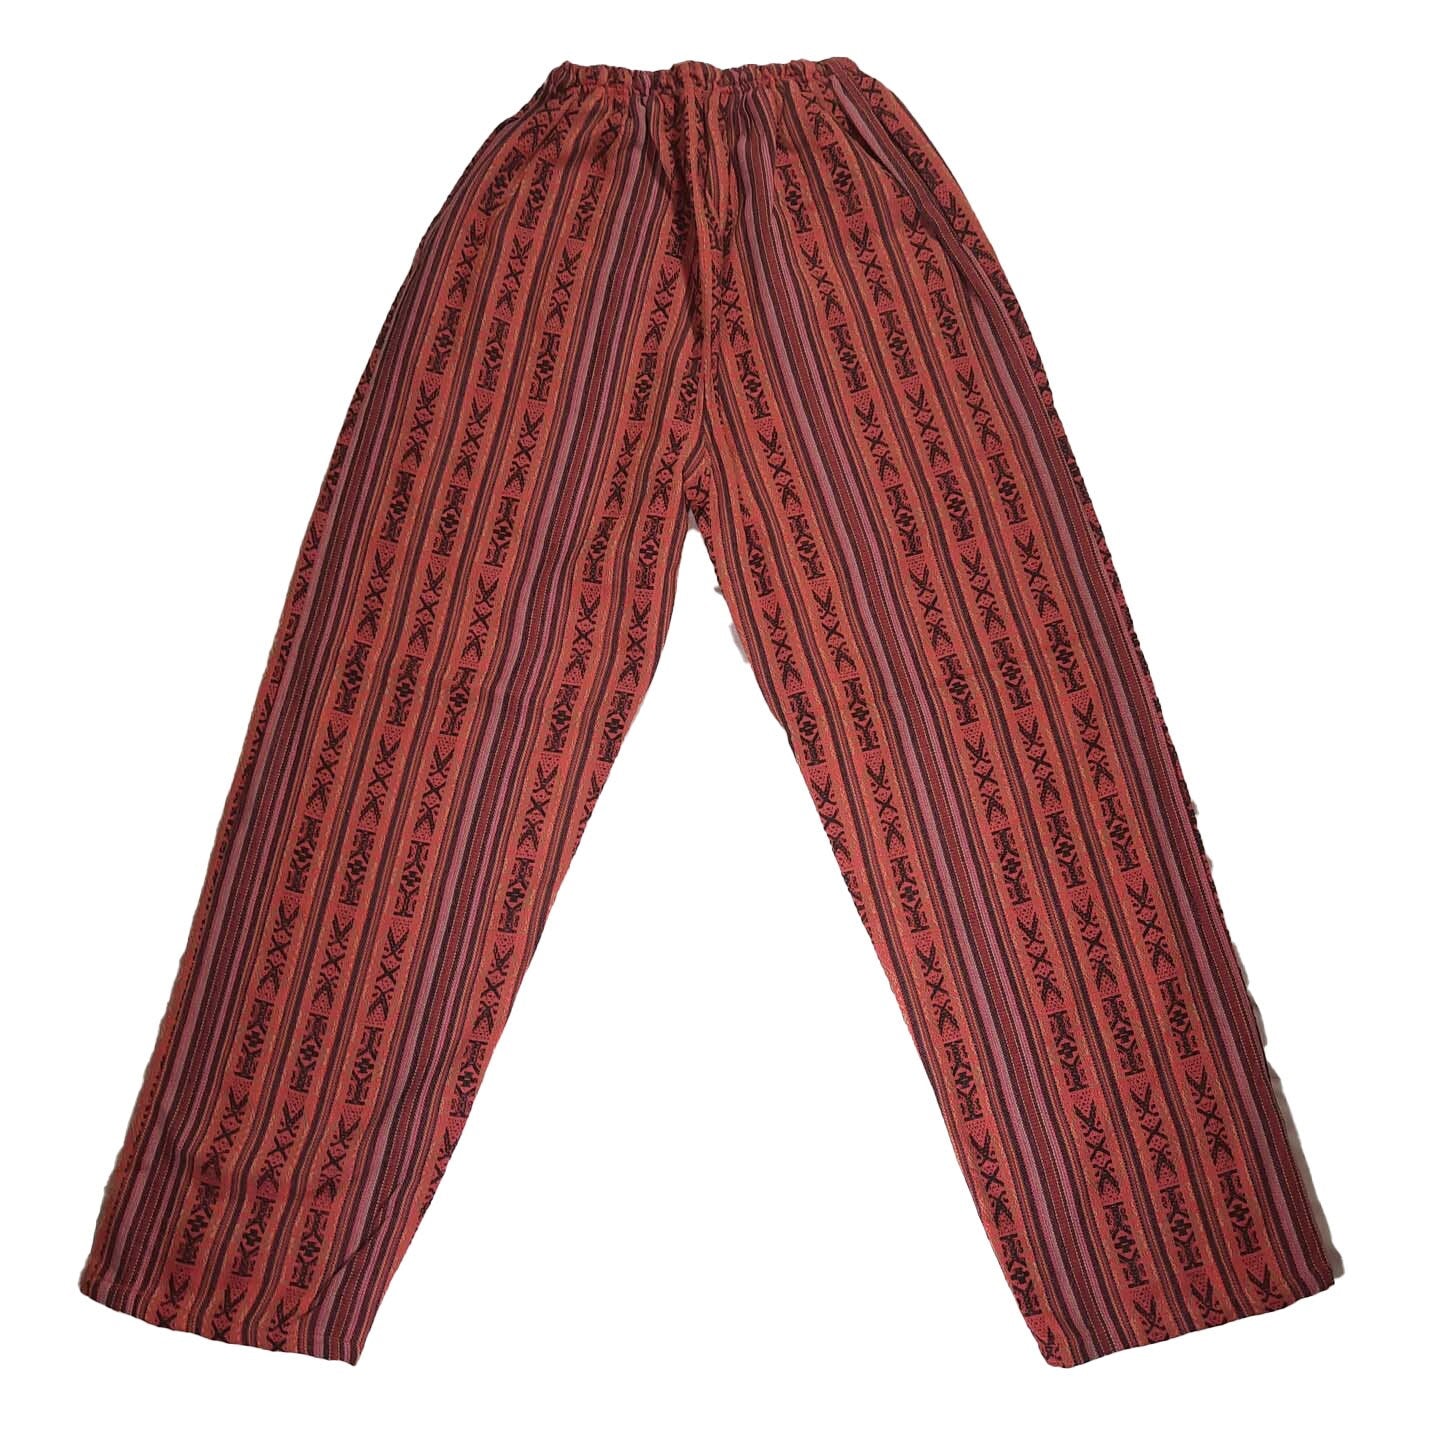 Boho Pants with Hidden Pockets Size M | Coral Brown